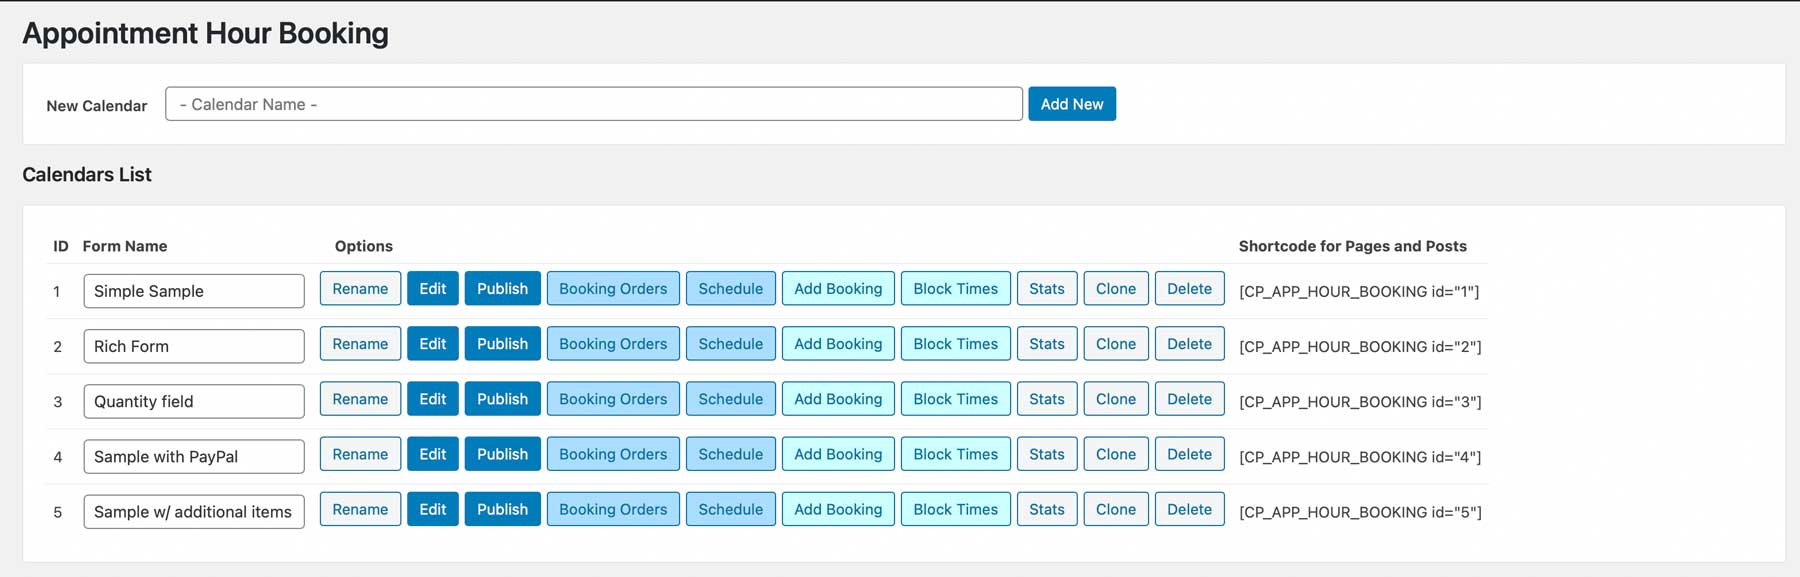 The interface of the Appointment Hour Booking plugin